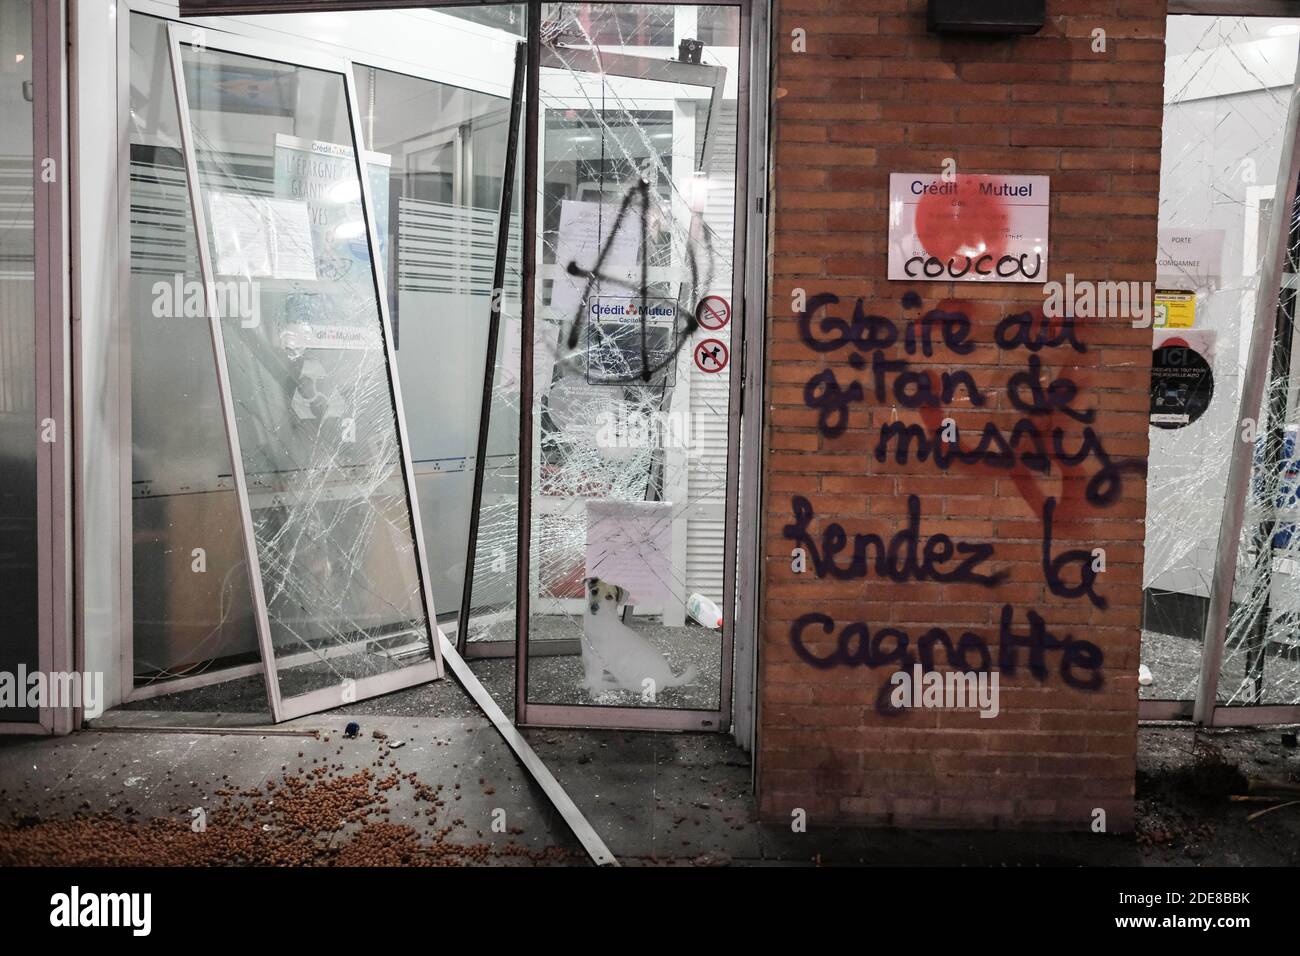 Devastated bank office, and tagged wall "Gloire au gitan de Massy - Rendez  la cagnotte" (Glory to the gypsy of Massy - Make the pot back), allusion to  Christophe Dettinger. The Gilets